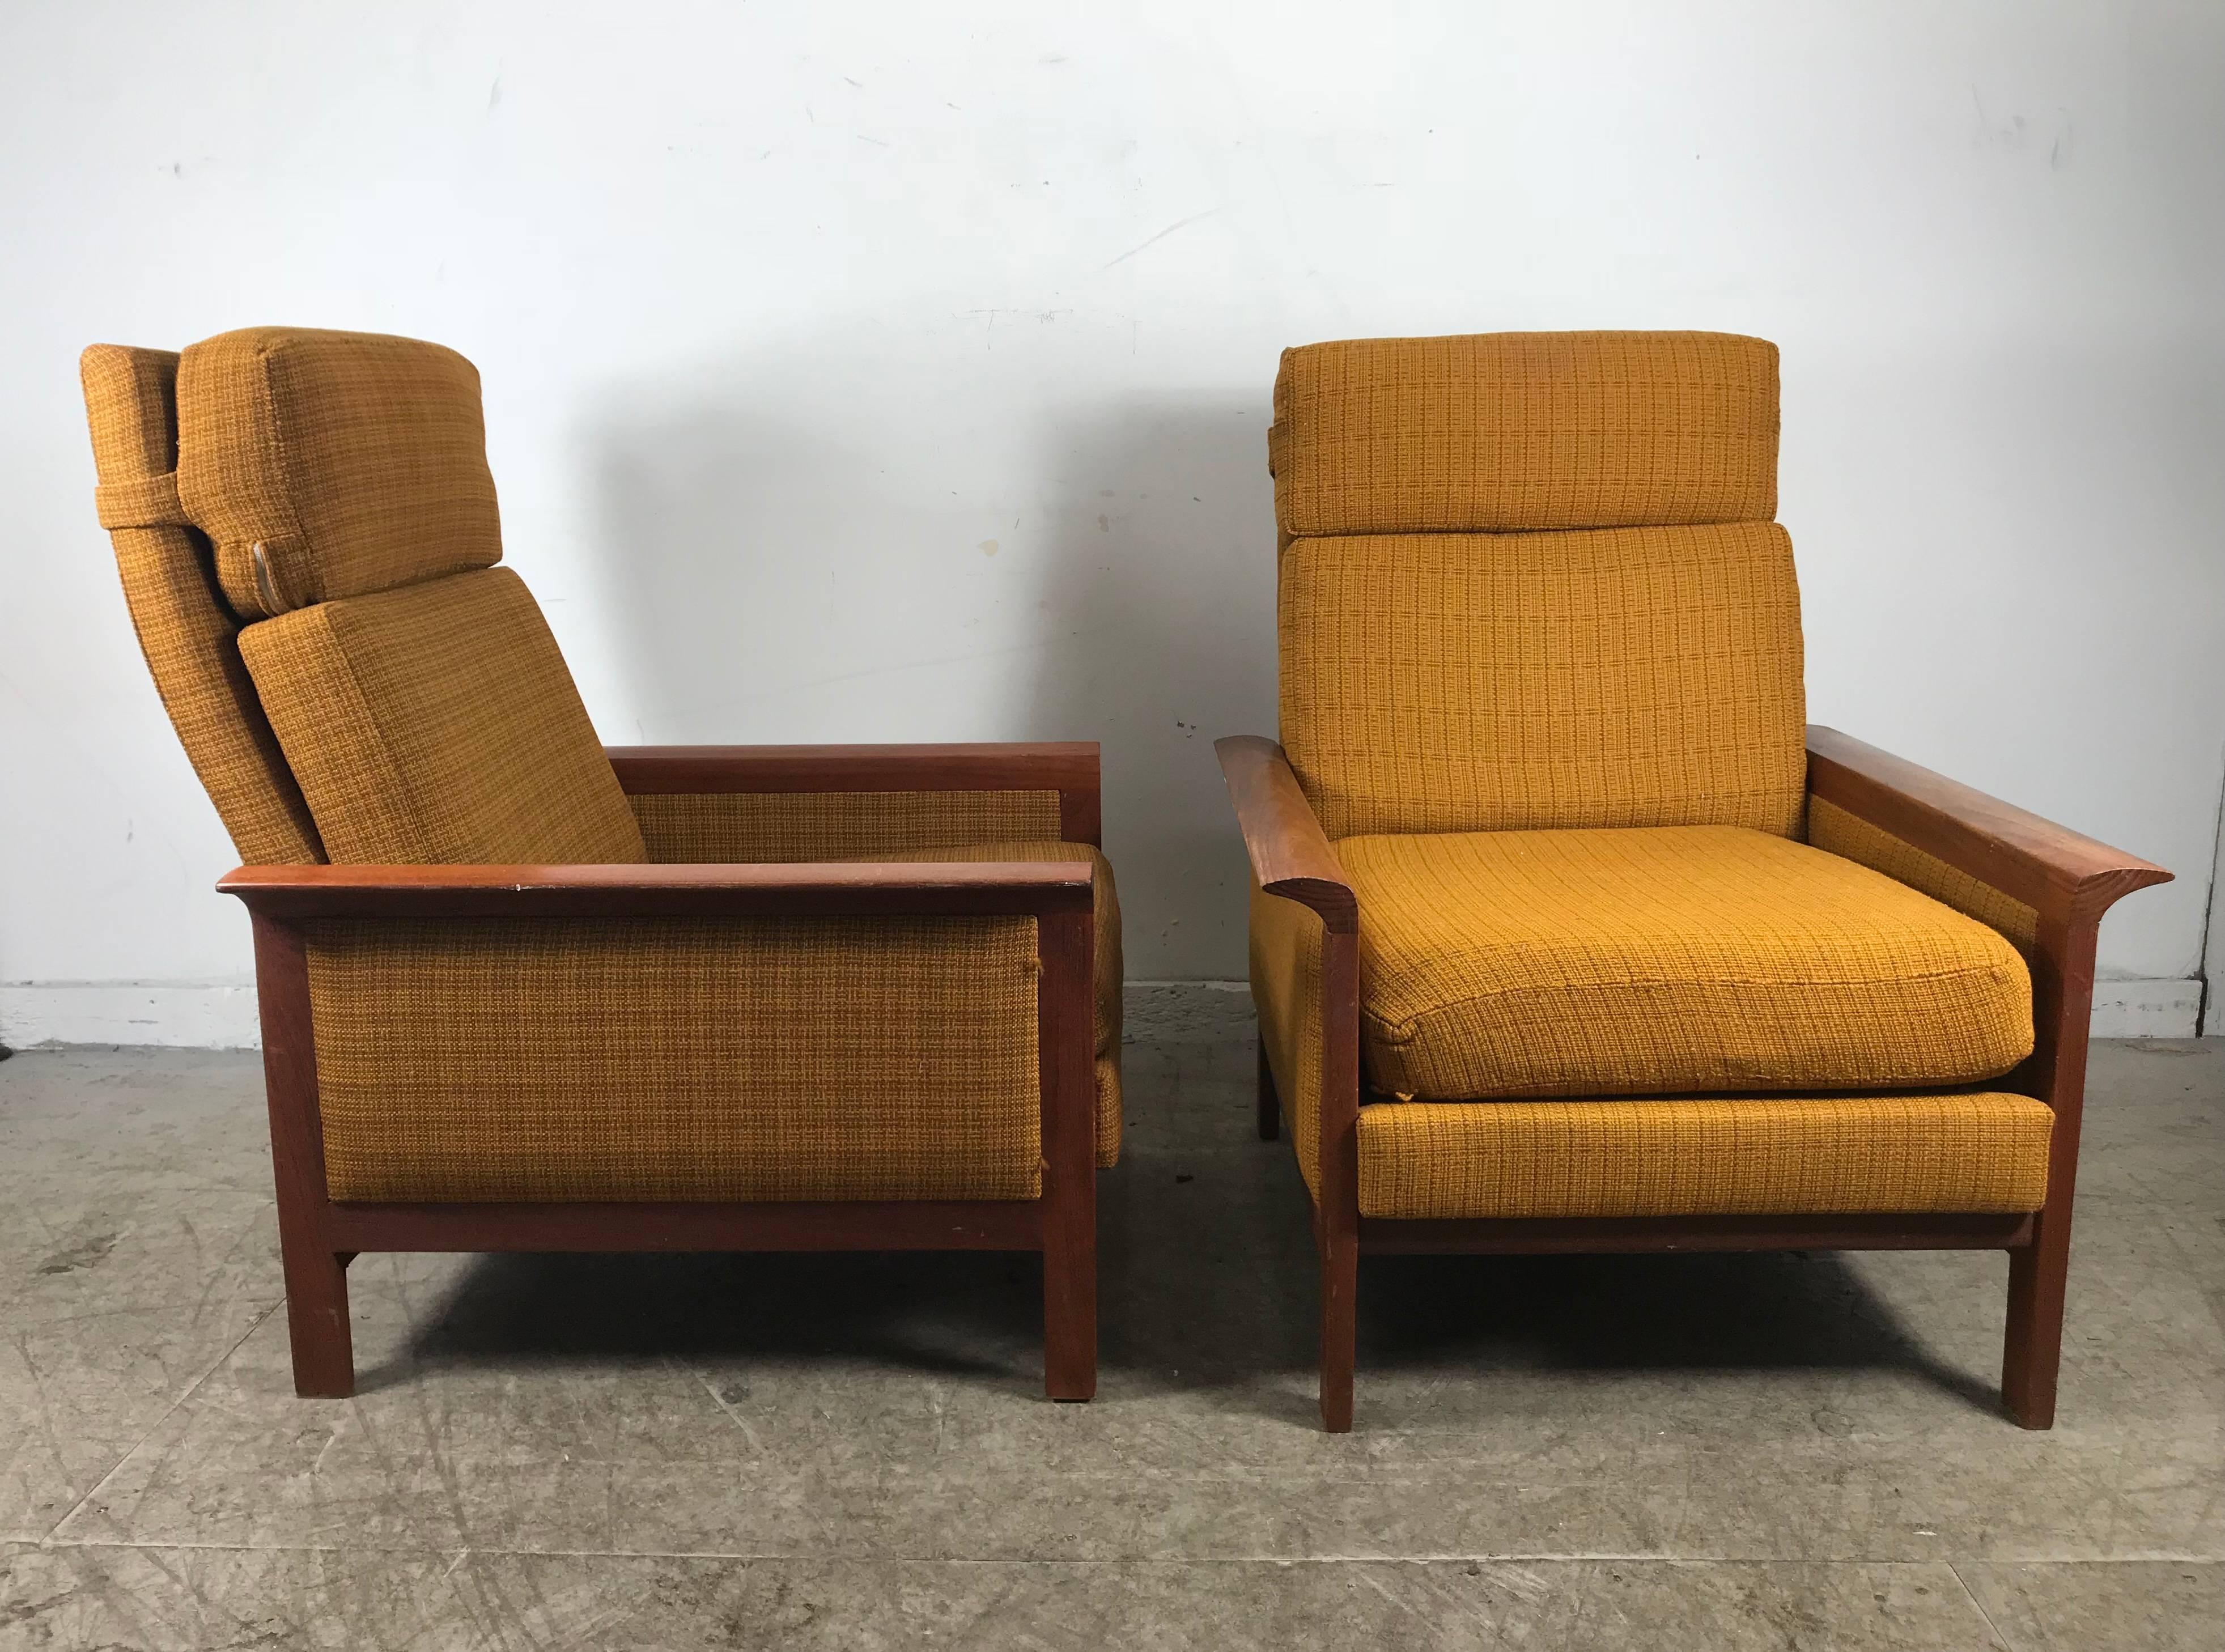 Classic Danish modern high back teak lounge chairs by Hans Olsen, superior quality and joinery solid Teak wood frame, retains original gold wool period upholstery. Extremely comfortable.